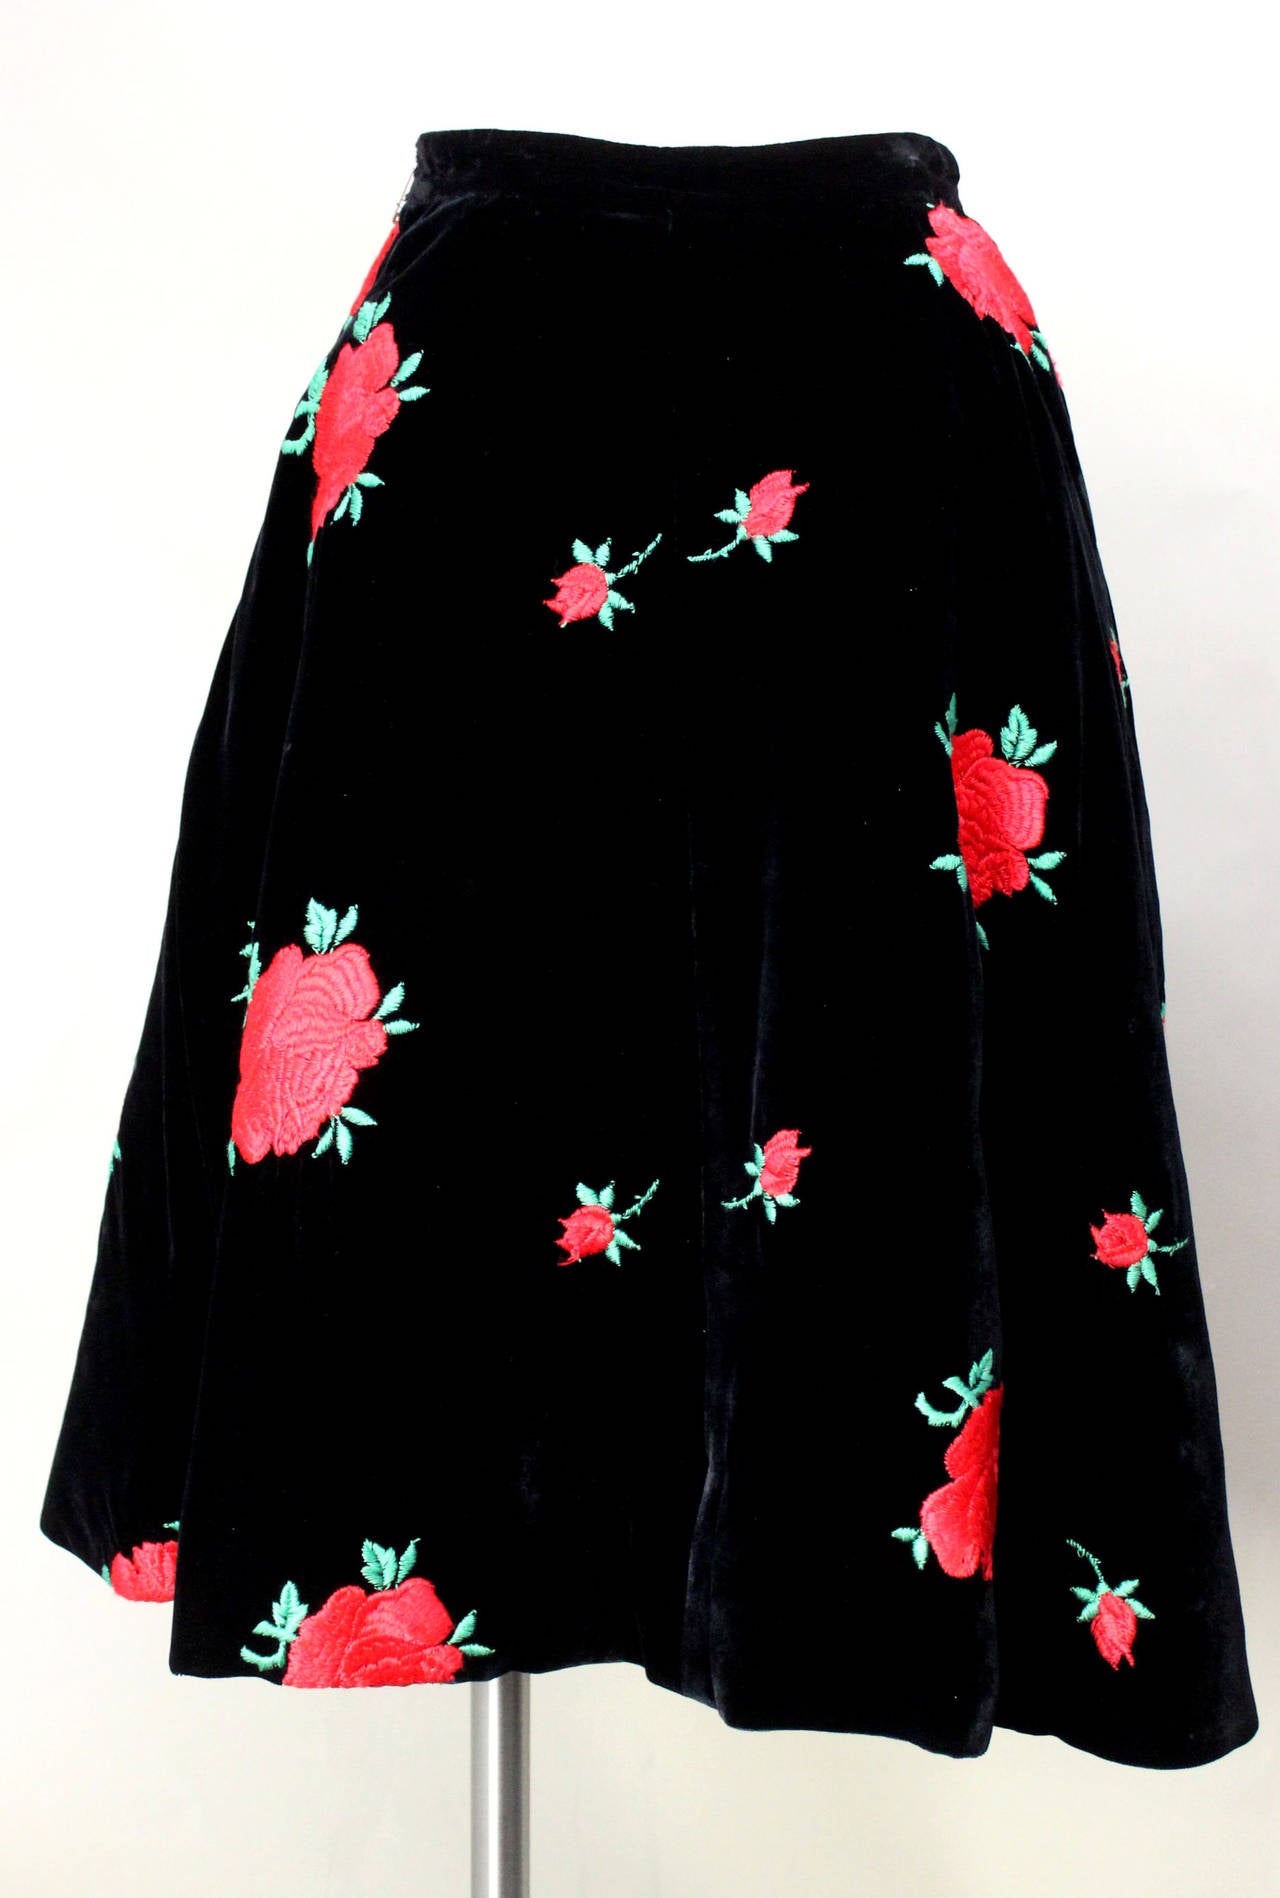 This amazing skirt is over 55 years old, but it looks like it was just snatched off the Dolce & Gabbana Fall 2015 Ready-to-Wear runway. The beautifully soft and rich black velvet is dotted with vibrant embroidered red roses. Fully lined in a